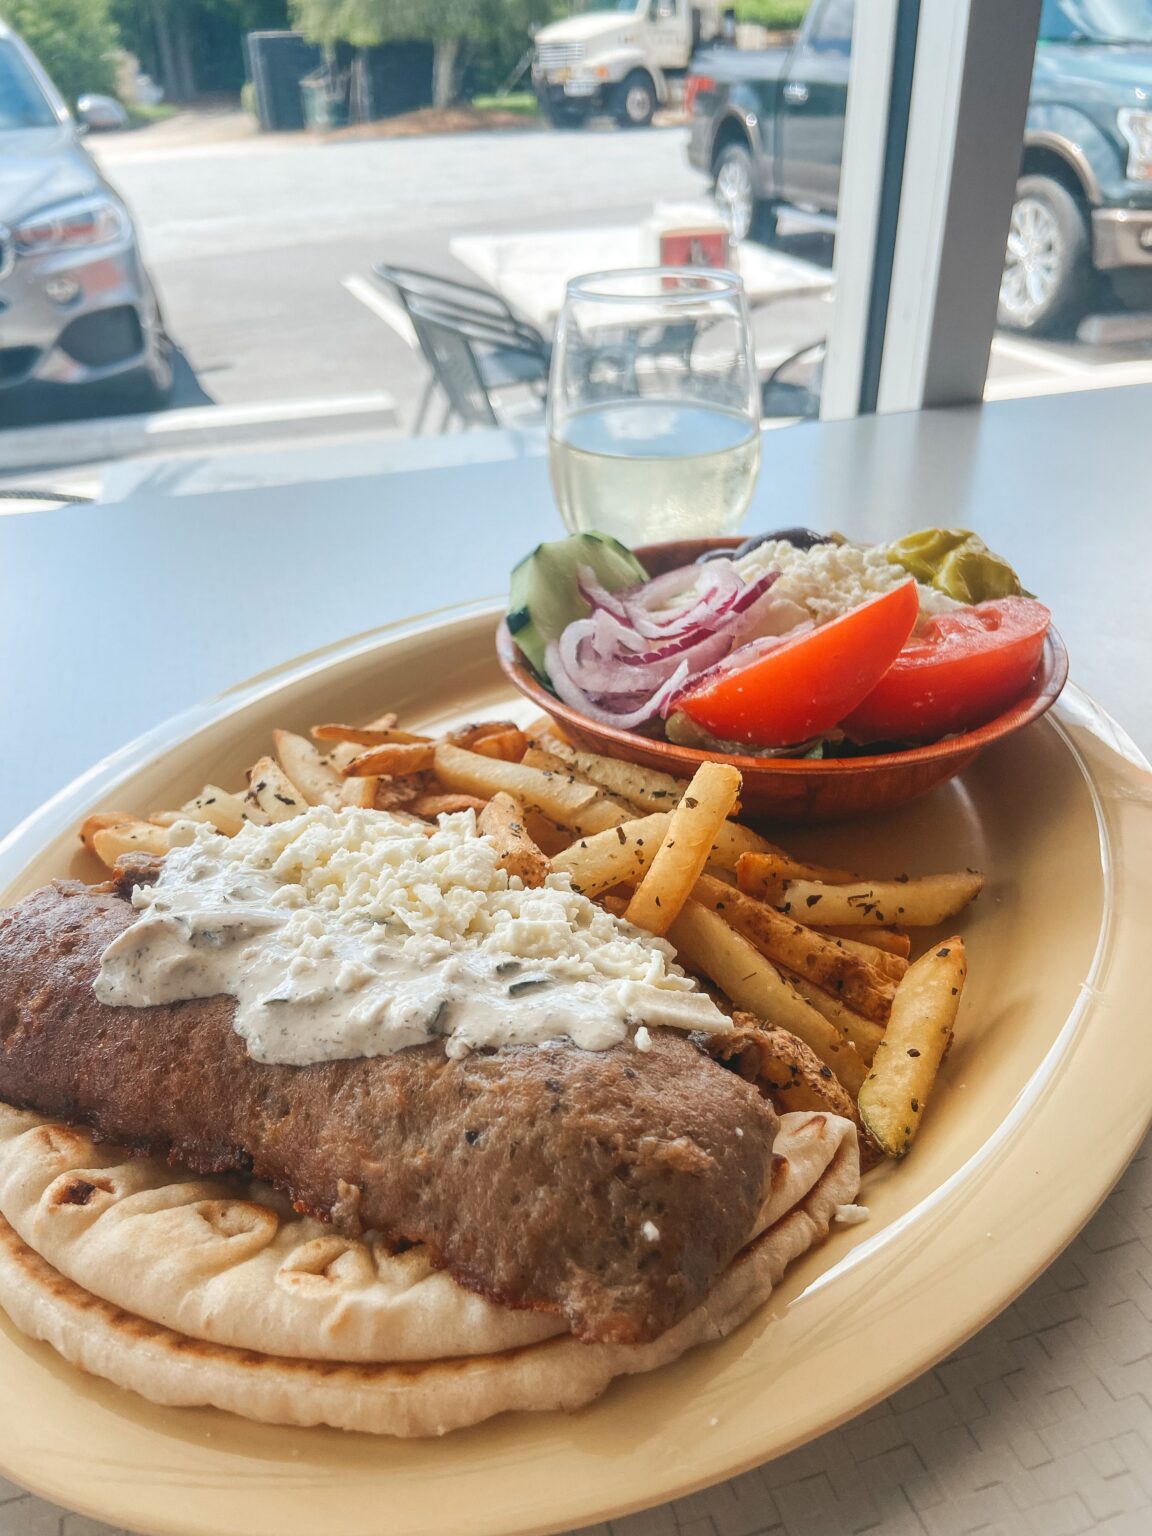 Celebrate National Gyro Day at The Greek Pizzeria & Gyros The Aha